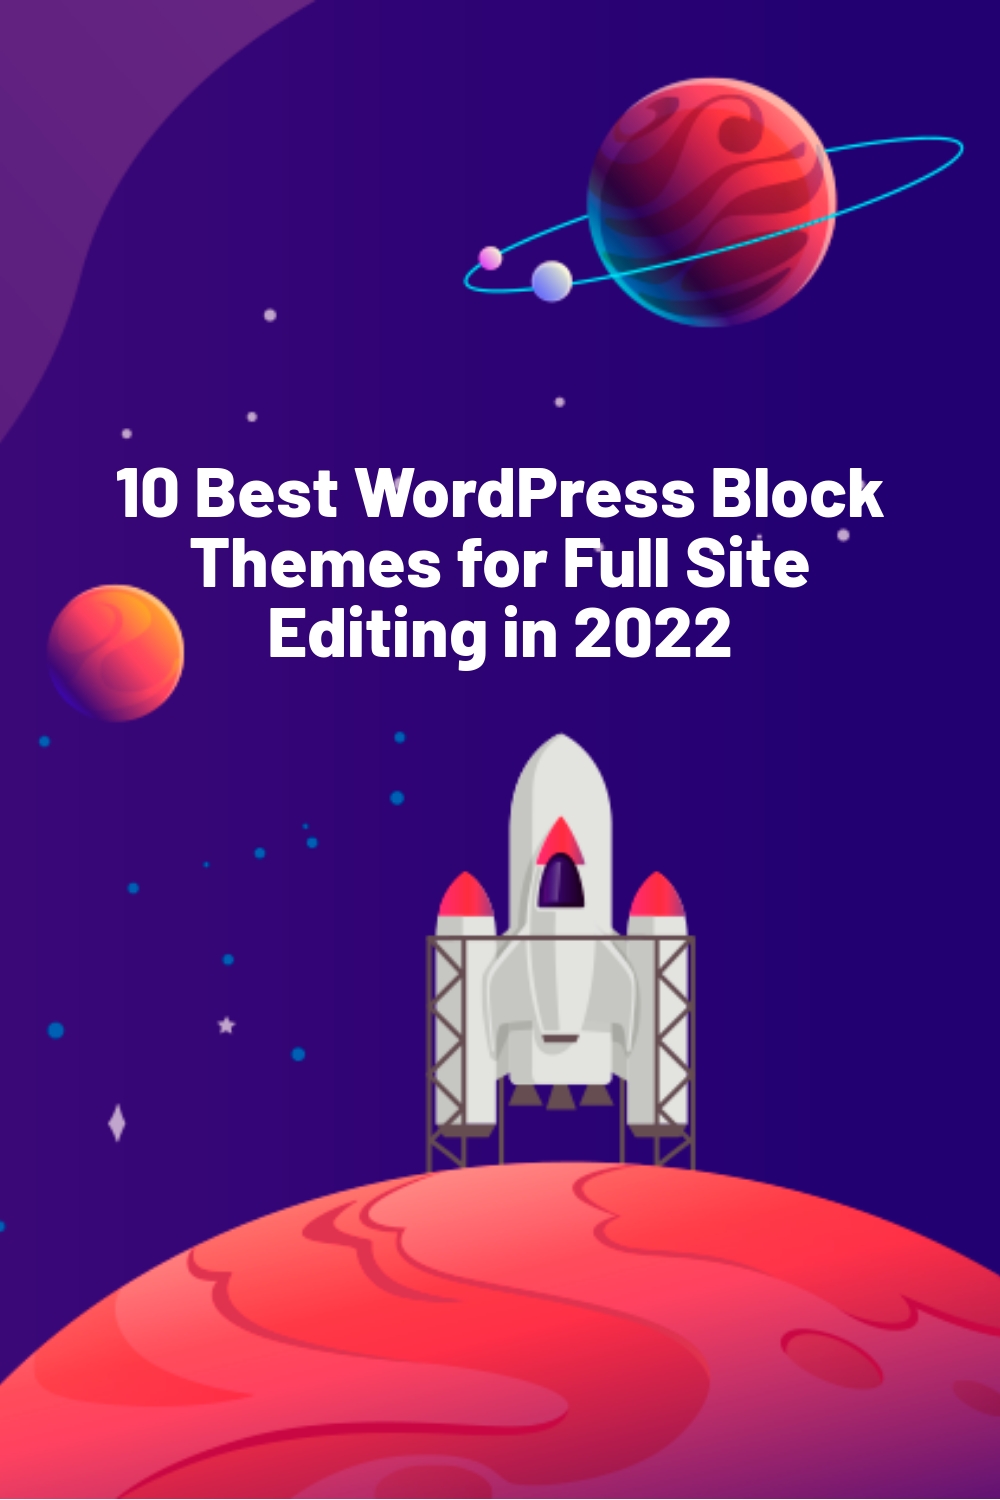 10 Best WordPress Block Themes for Full Site Editing in 2022